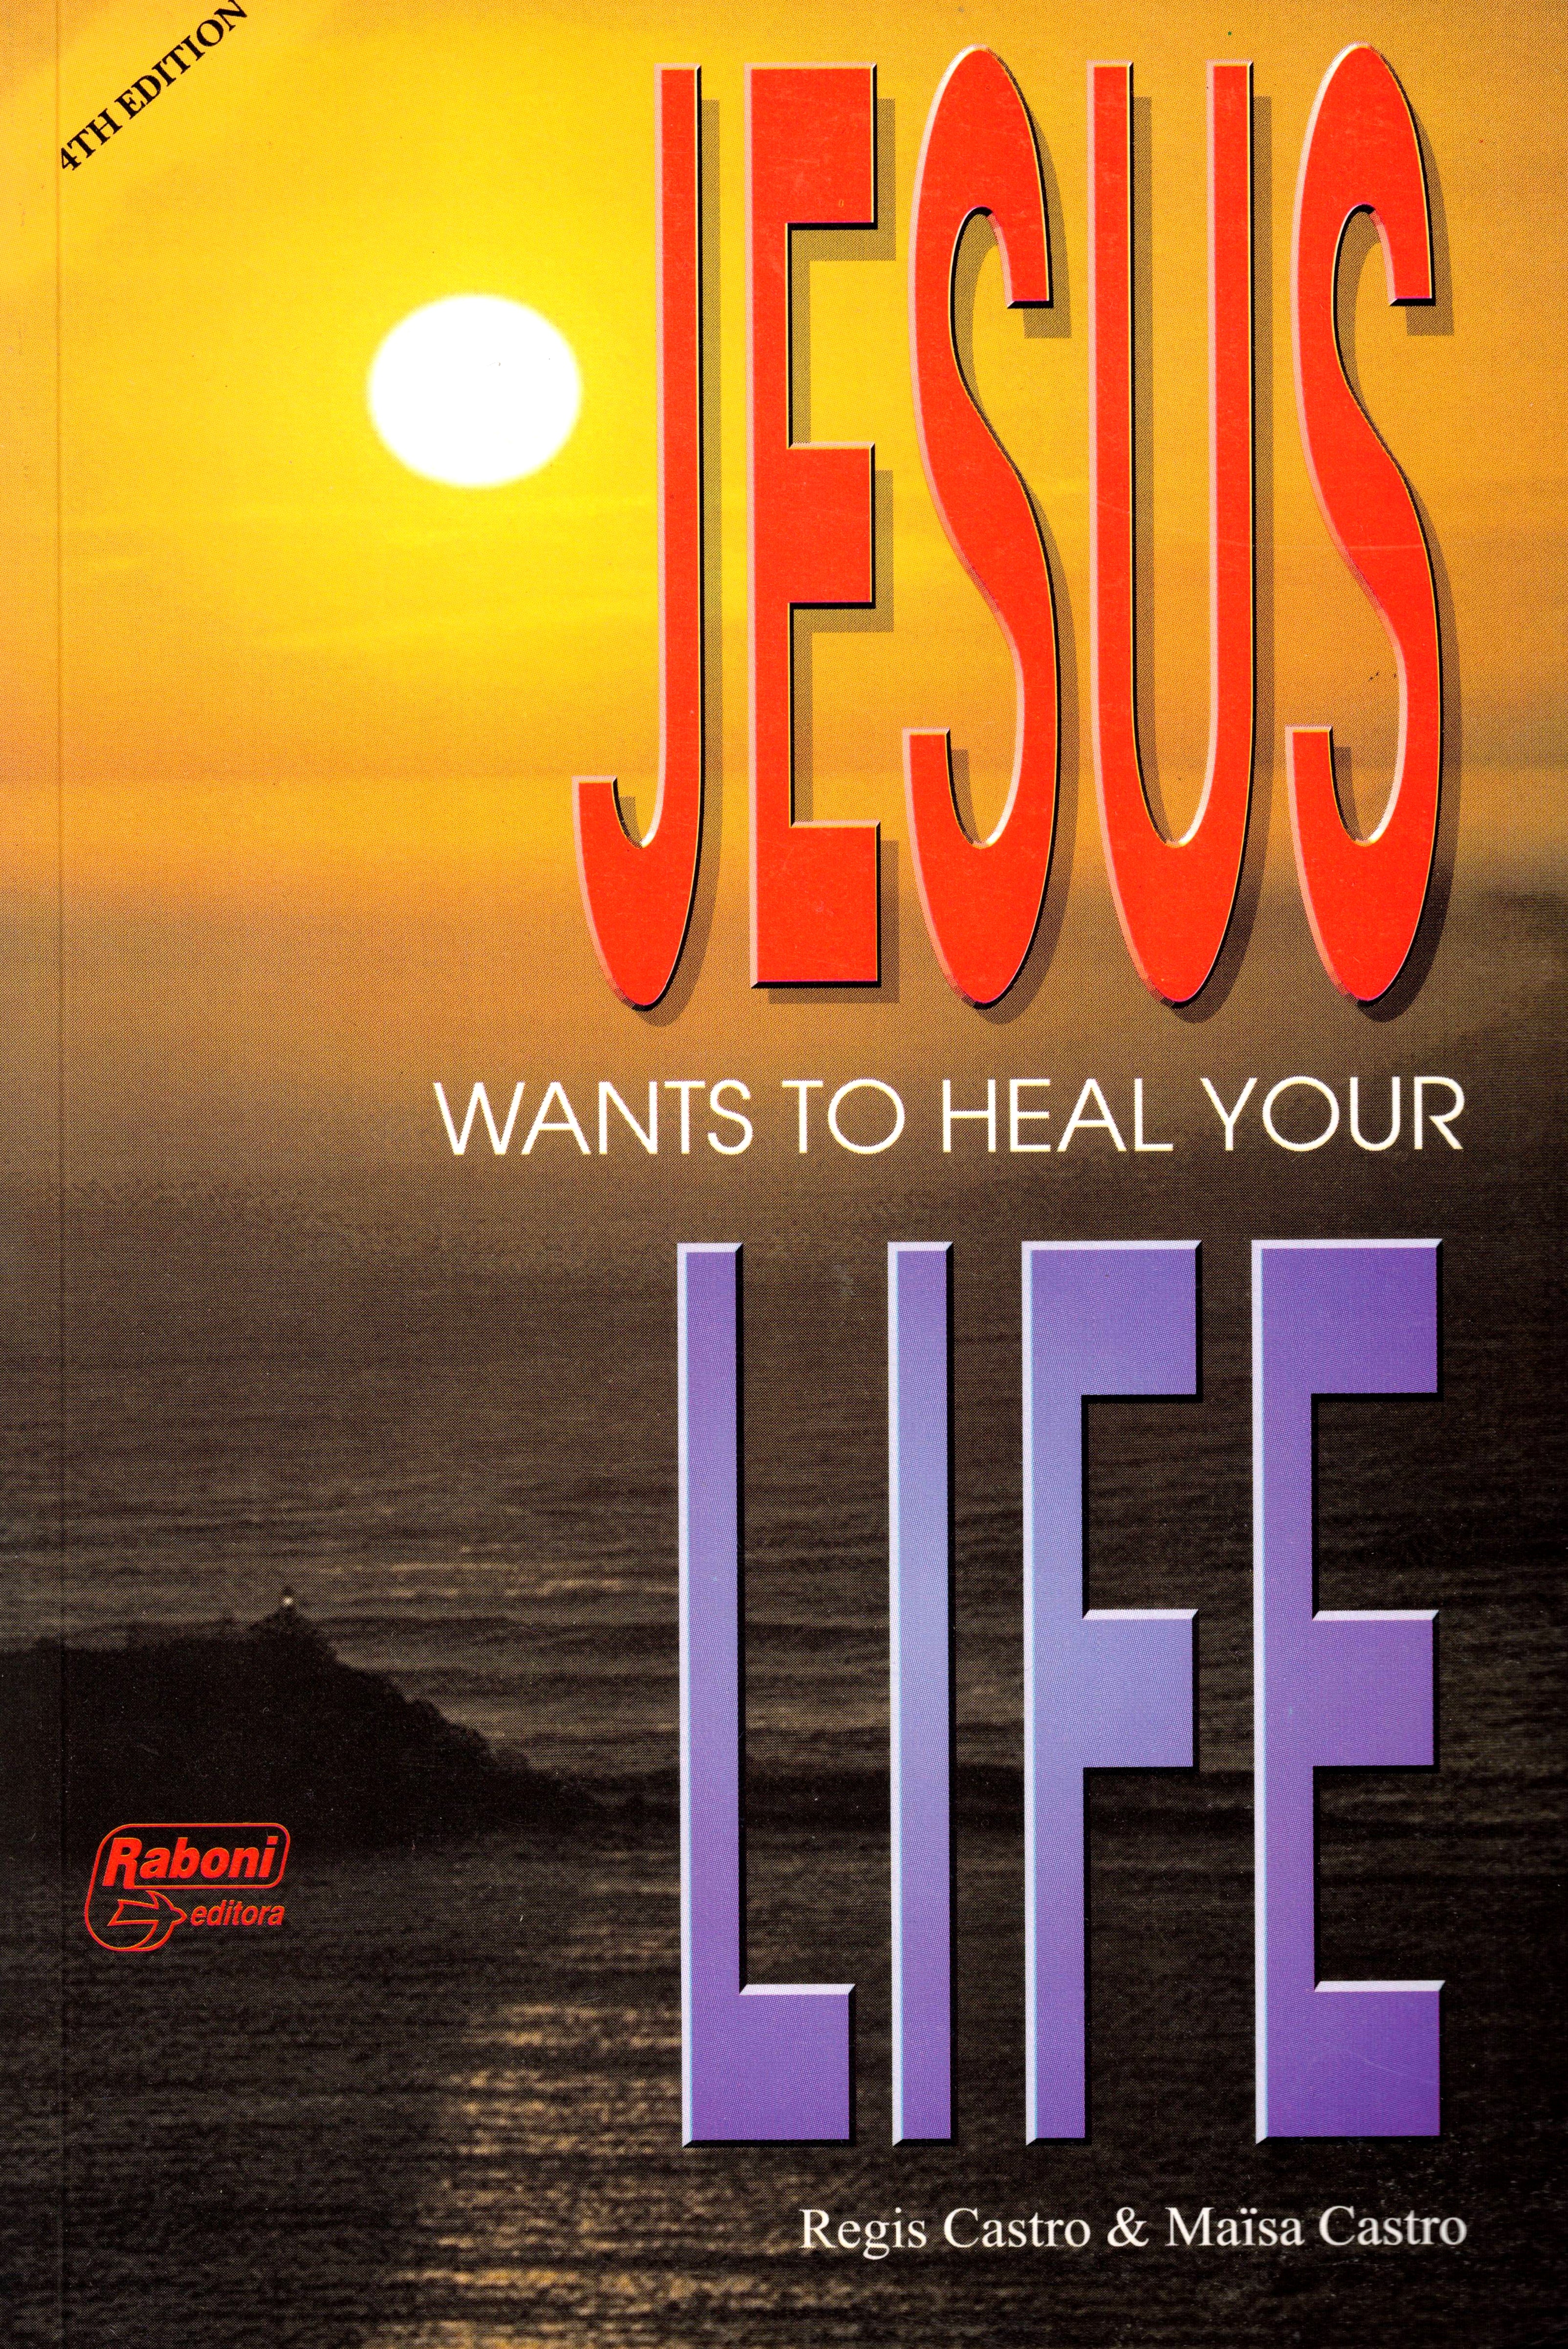 Jesus Wants to Heal Your Life